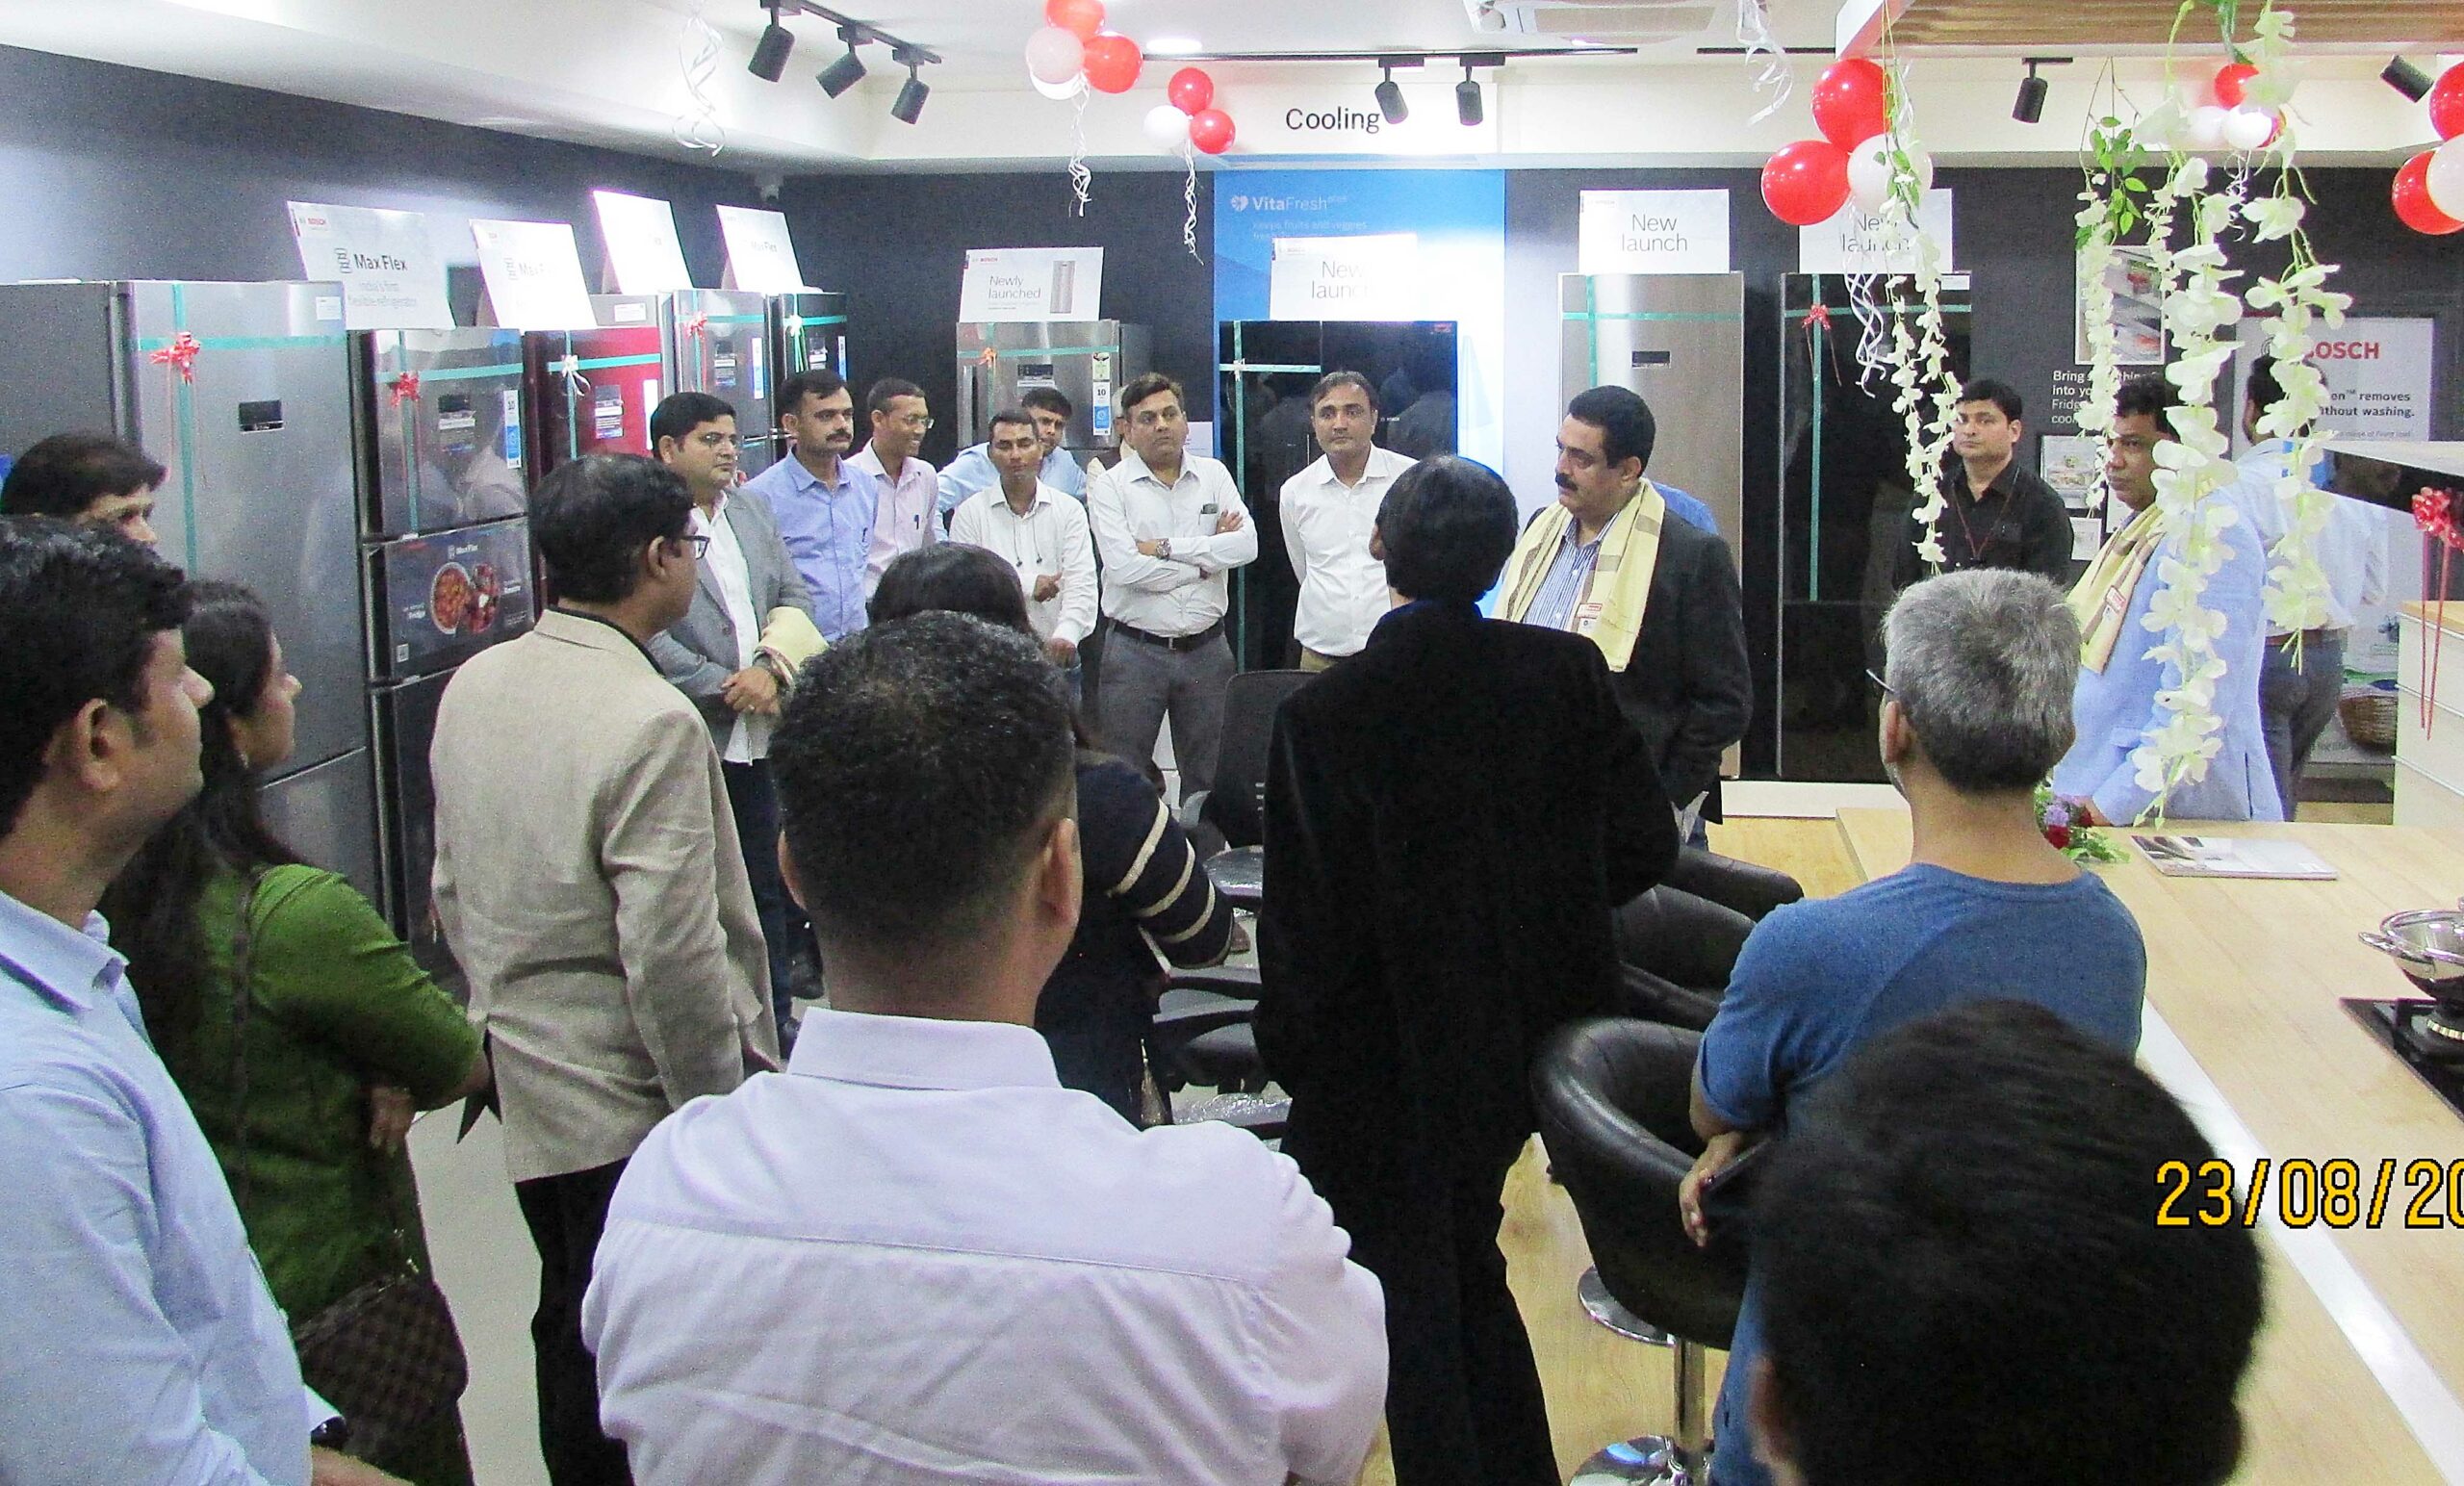 Bosch launched two new brand stores in Ahmedabad at Bhopal and Bapunagar